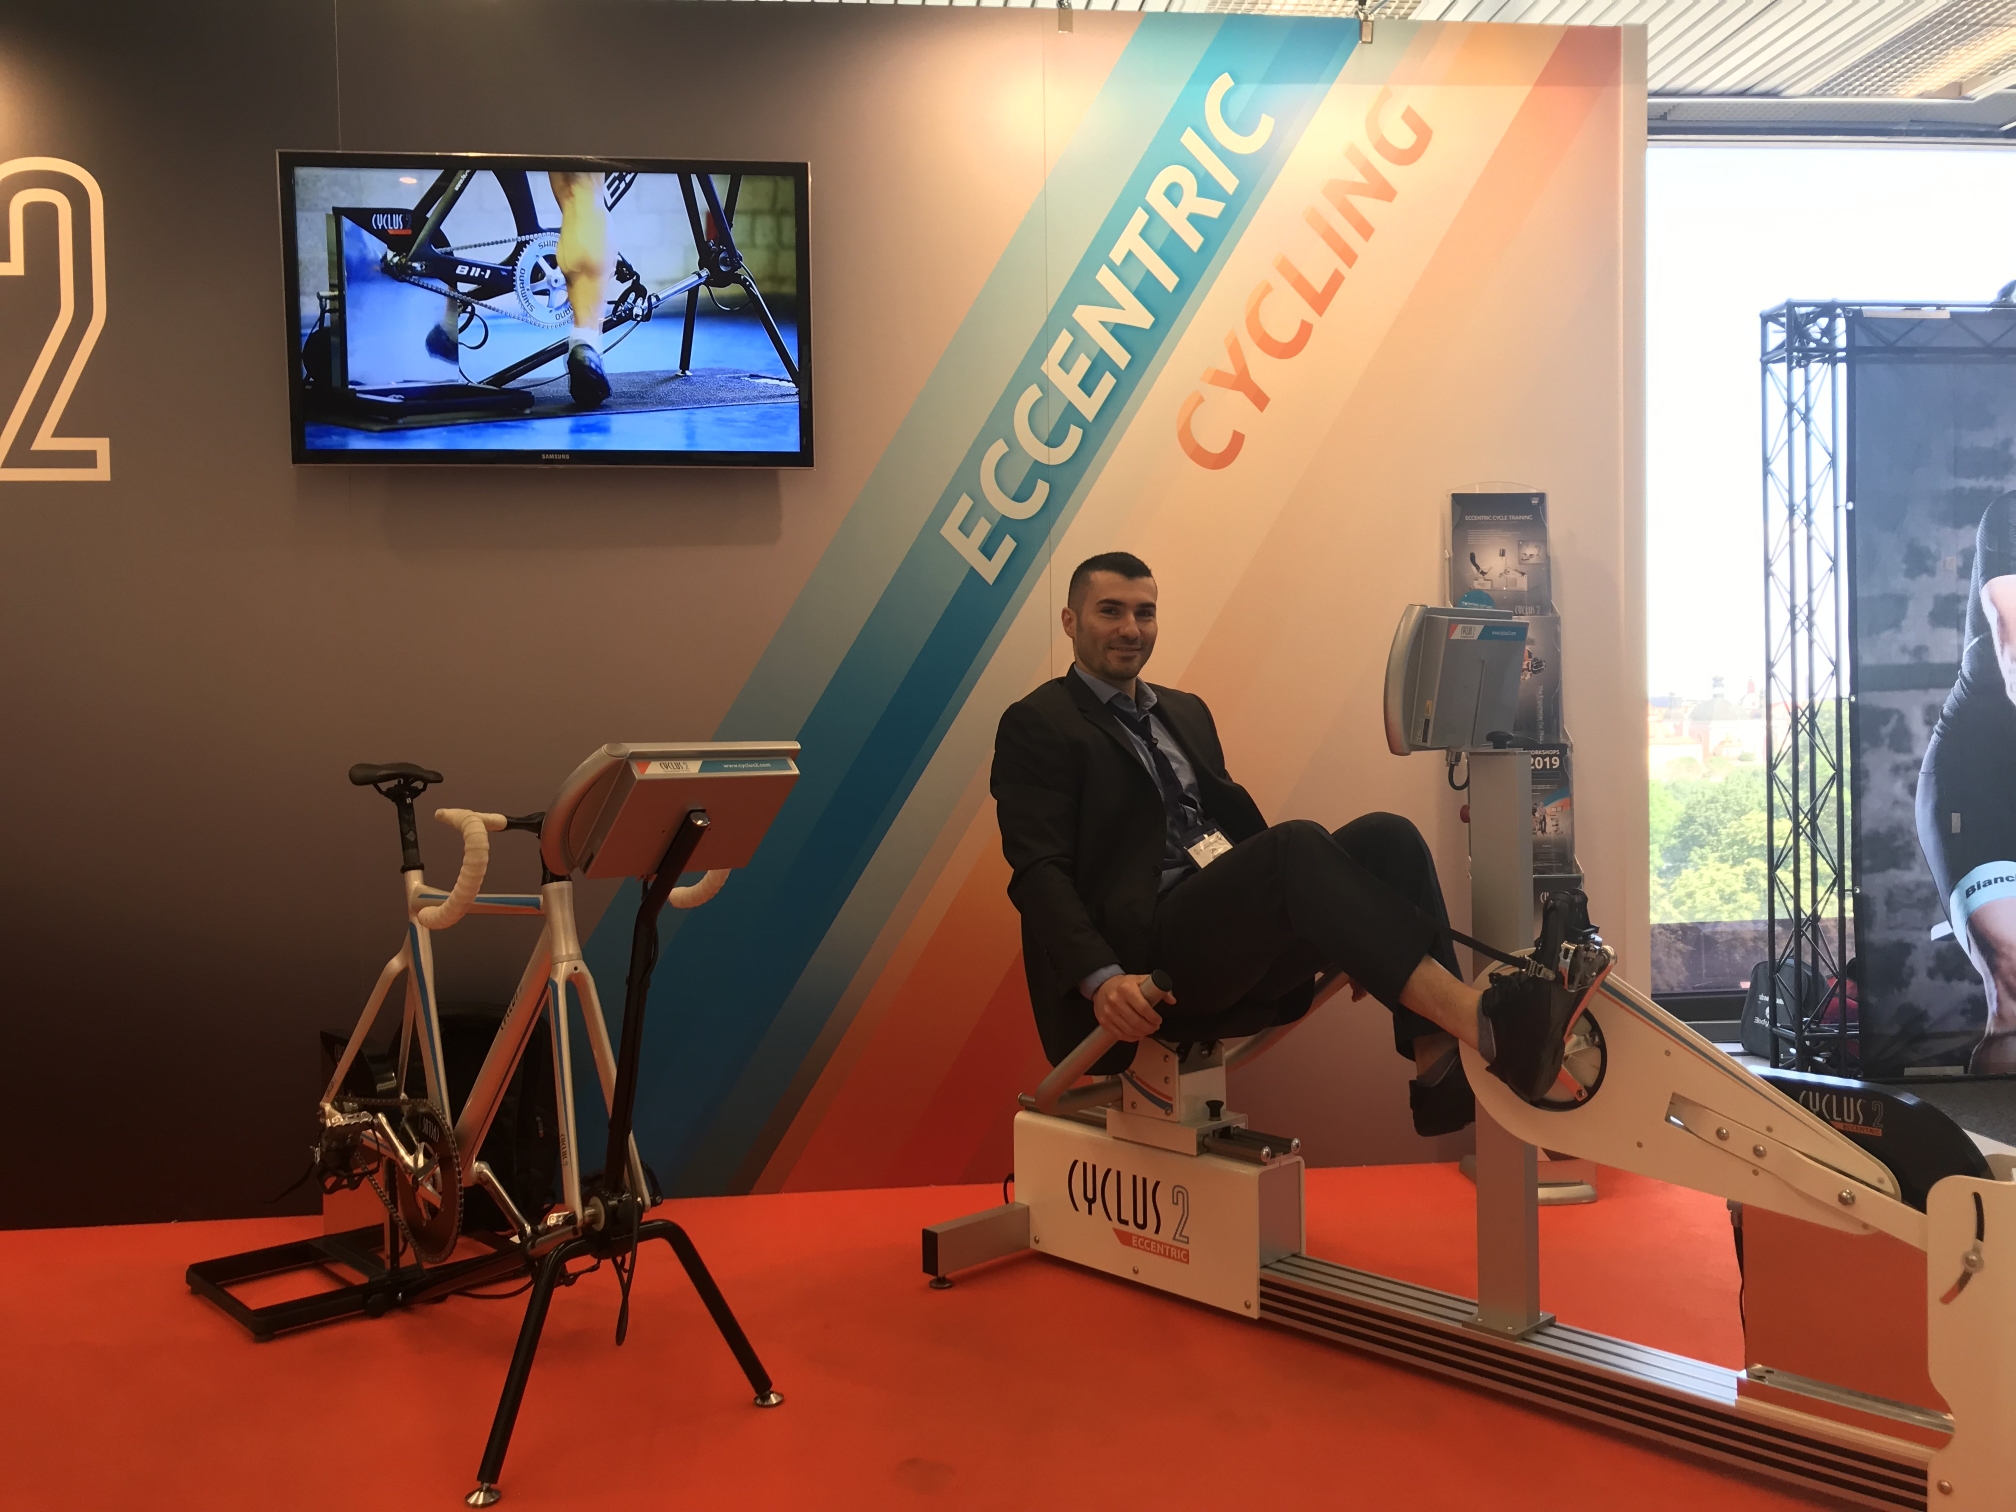 Cyclus 2 Eccentric Cycling at the ECSS 2019